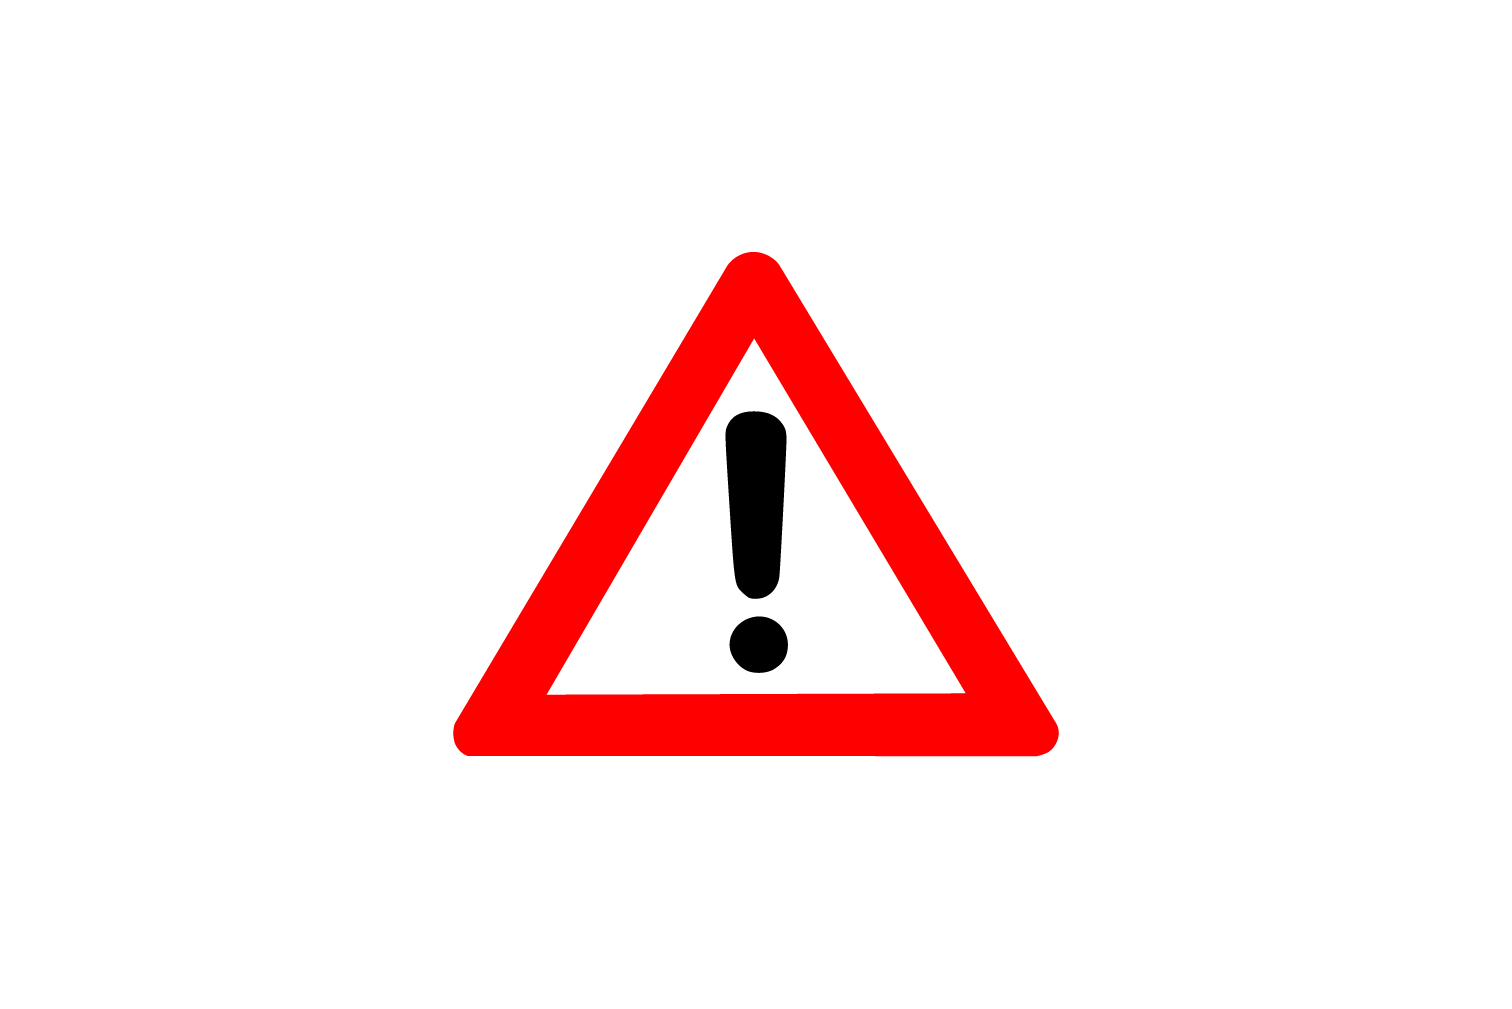 Red warning tringle with black exclamation mark in the center